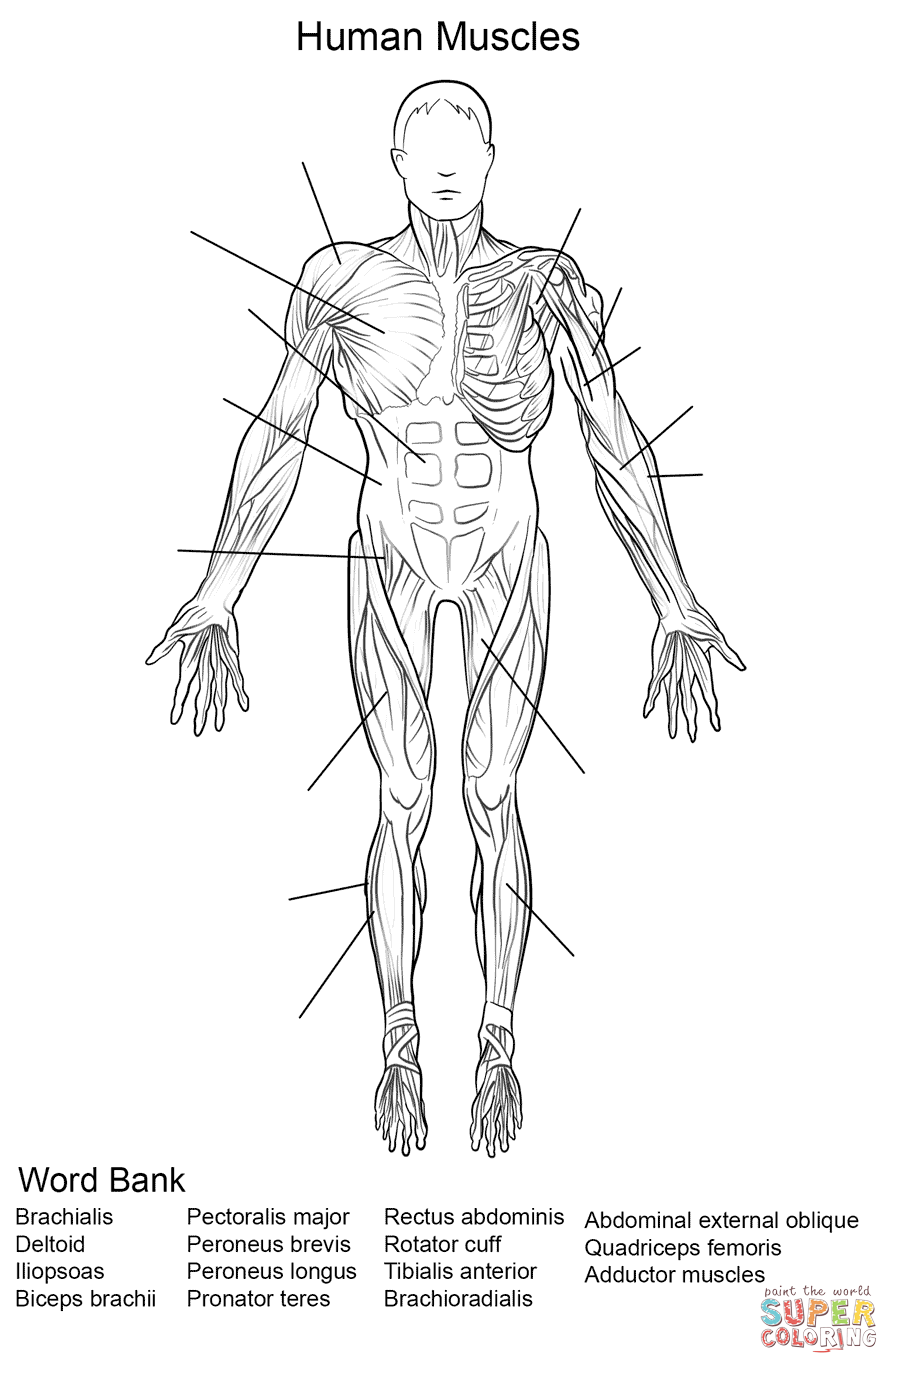 Human Muscles Front View Worksheet Coloring Page Free 